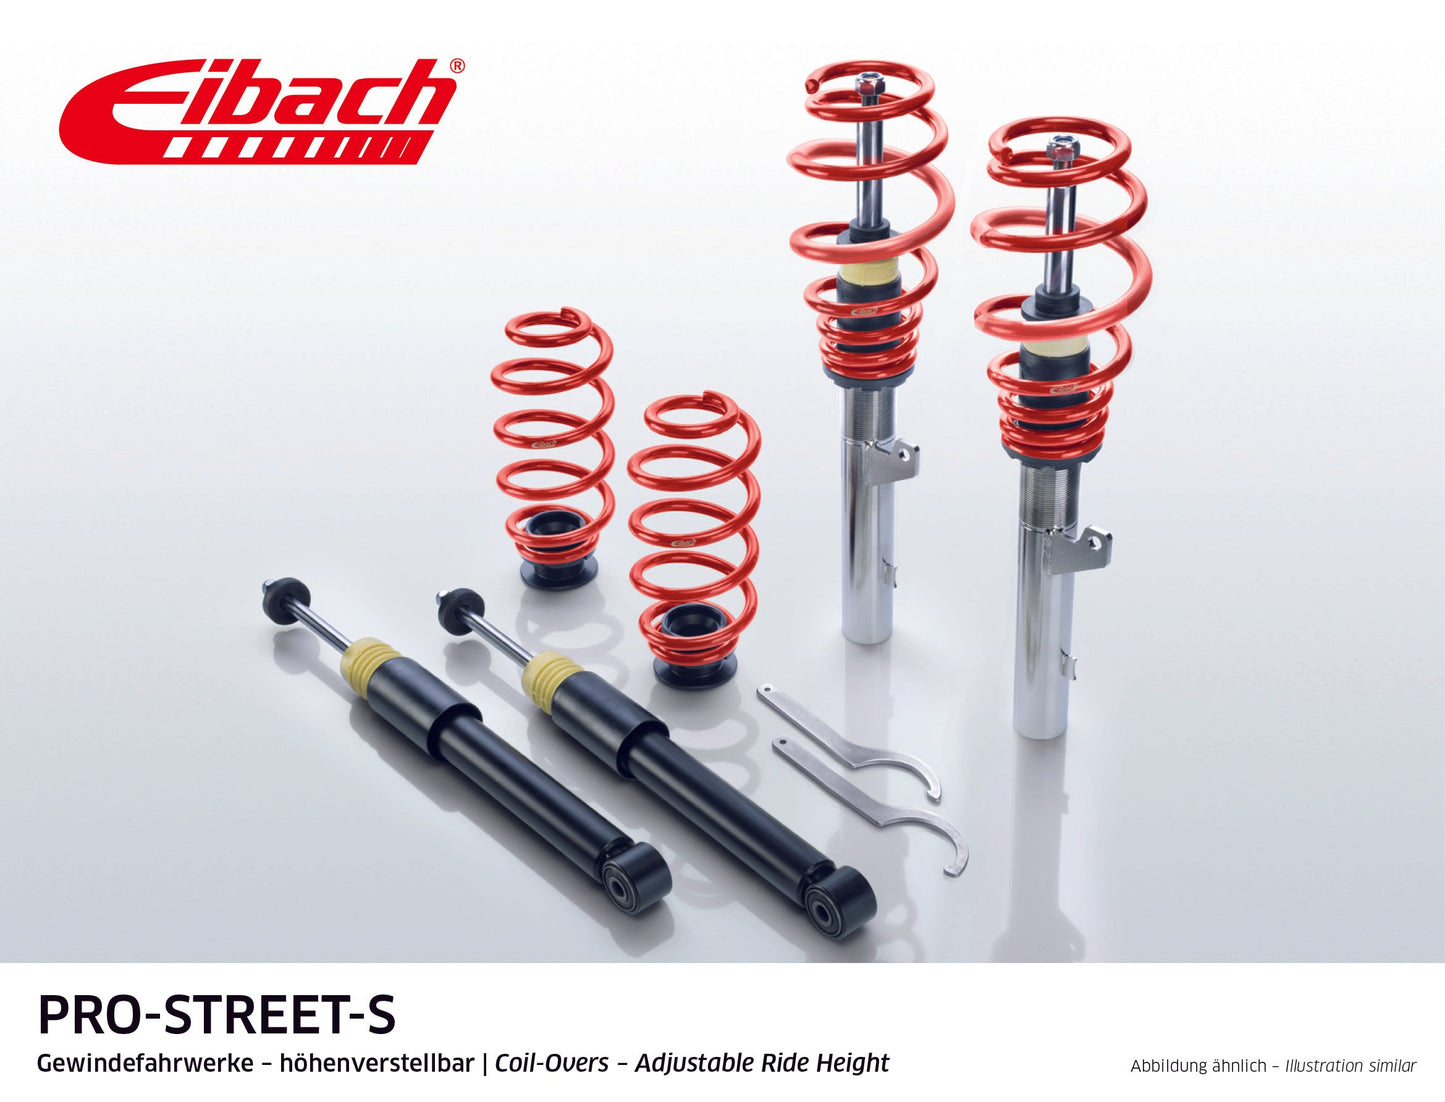 Eibach Pro-Street Coilover (PSS65-20-001-02-22) at £1217.92